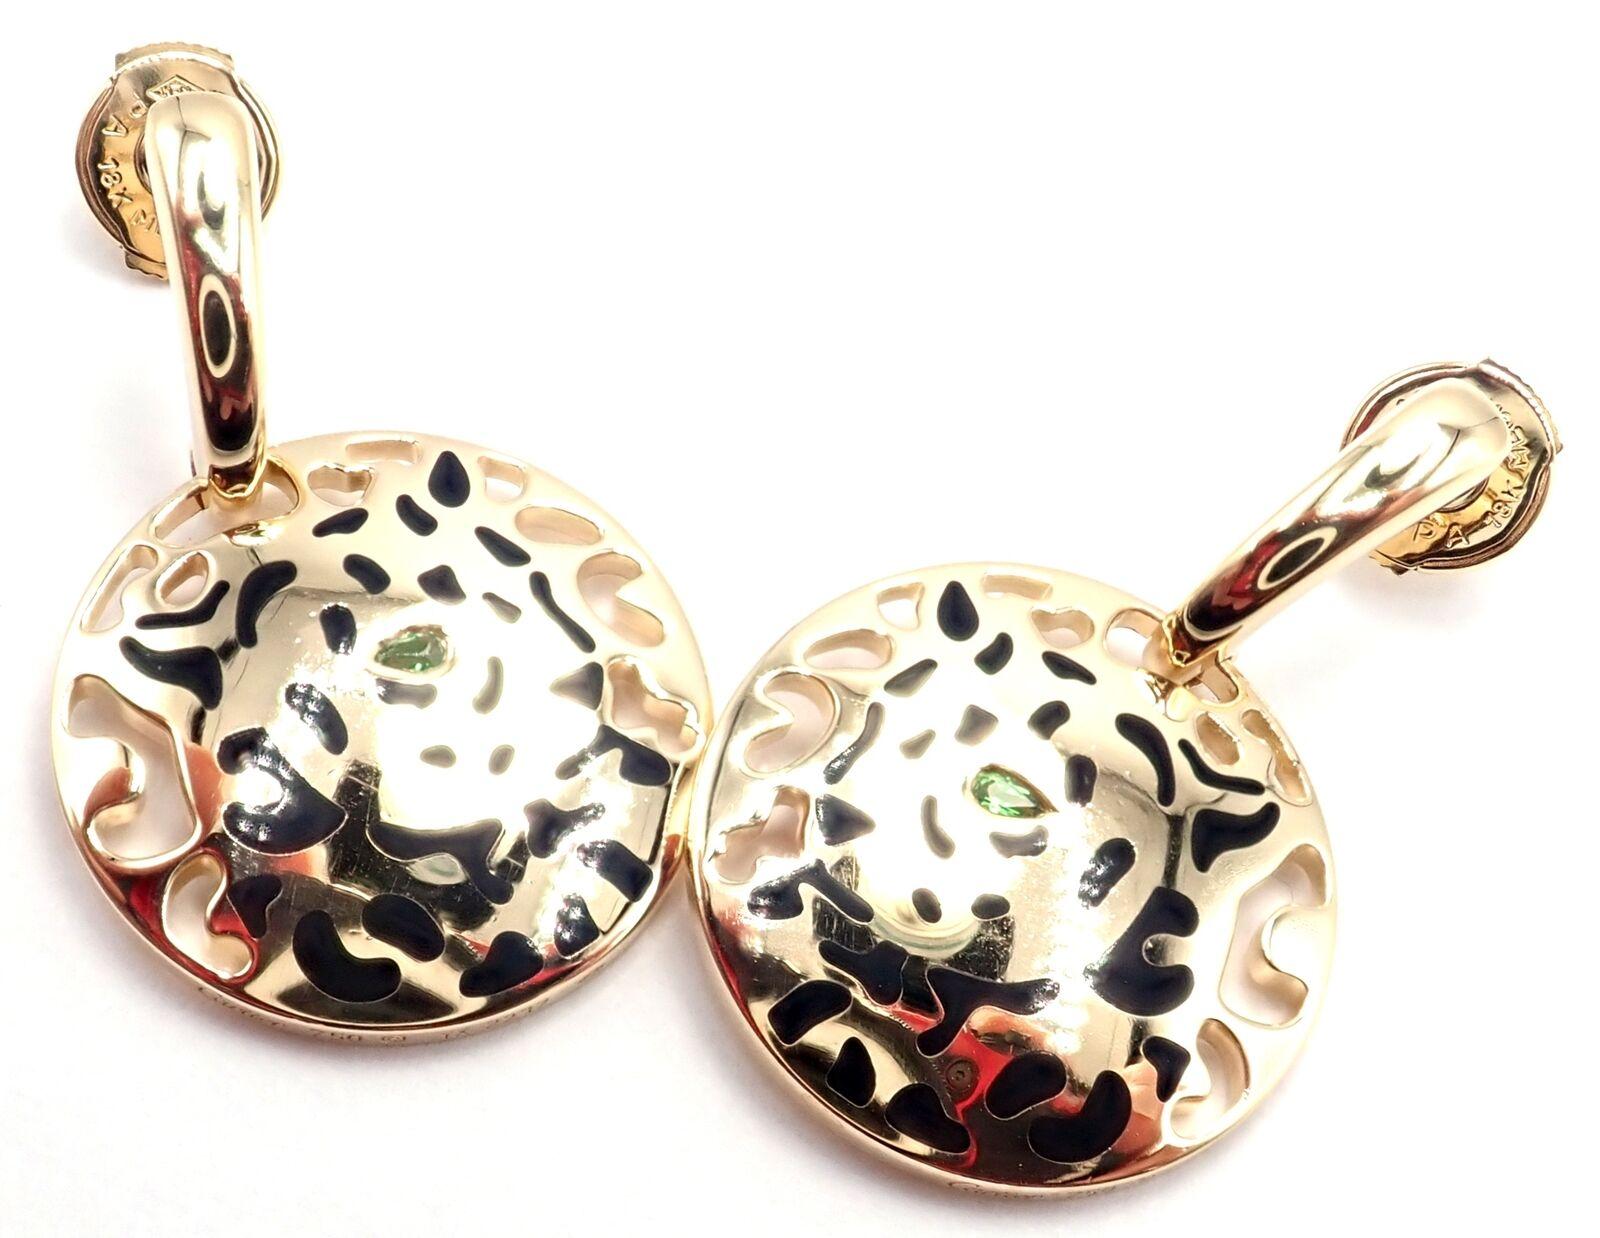 Brilliant Cut Cartier Panther Panthere Lacquer Tsavorite Garnet Yellow Gold Earrings For Sale